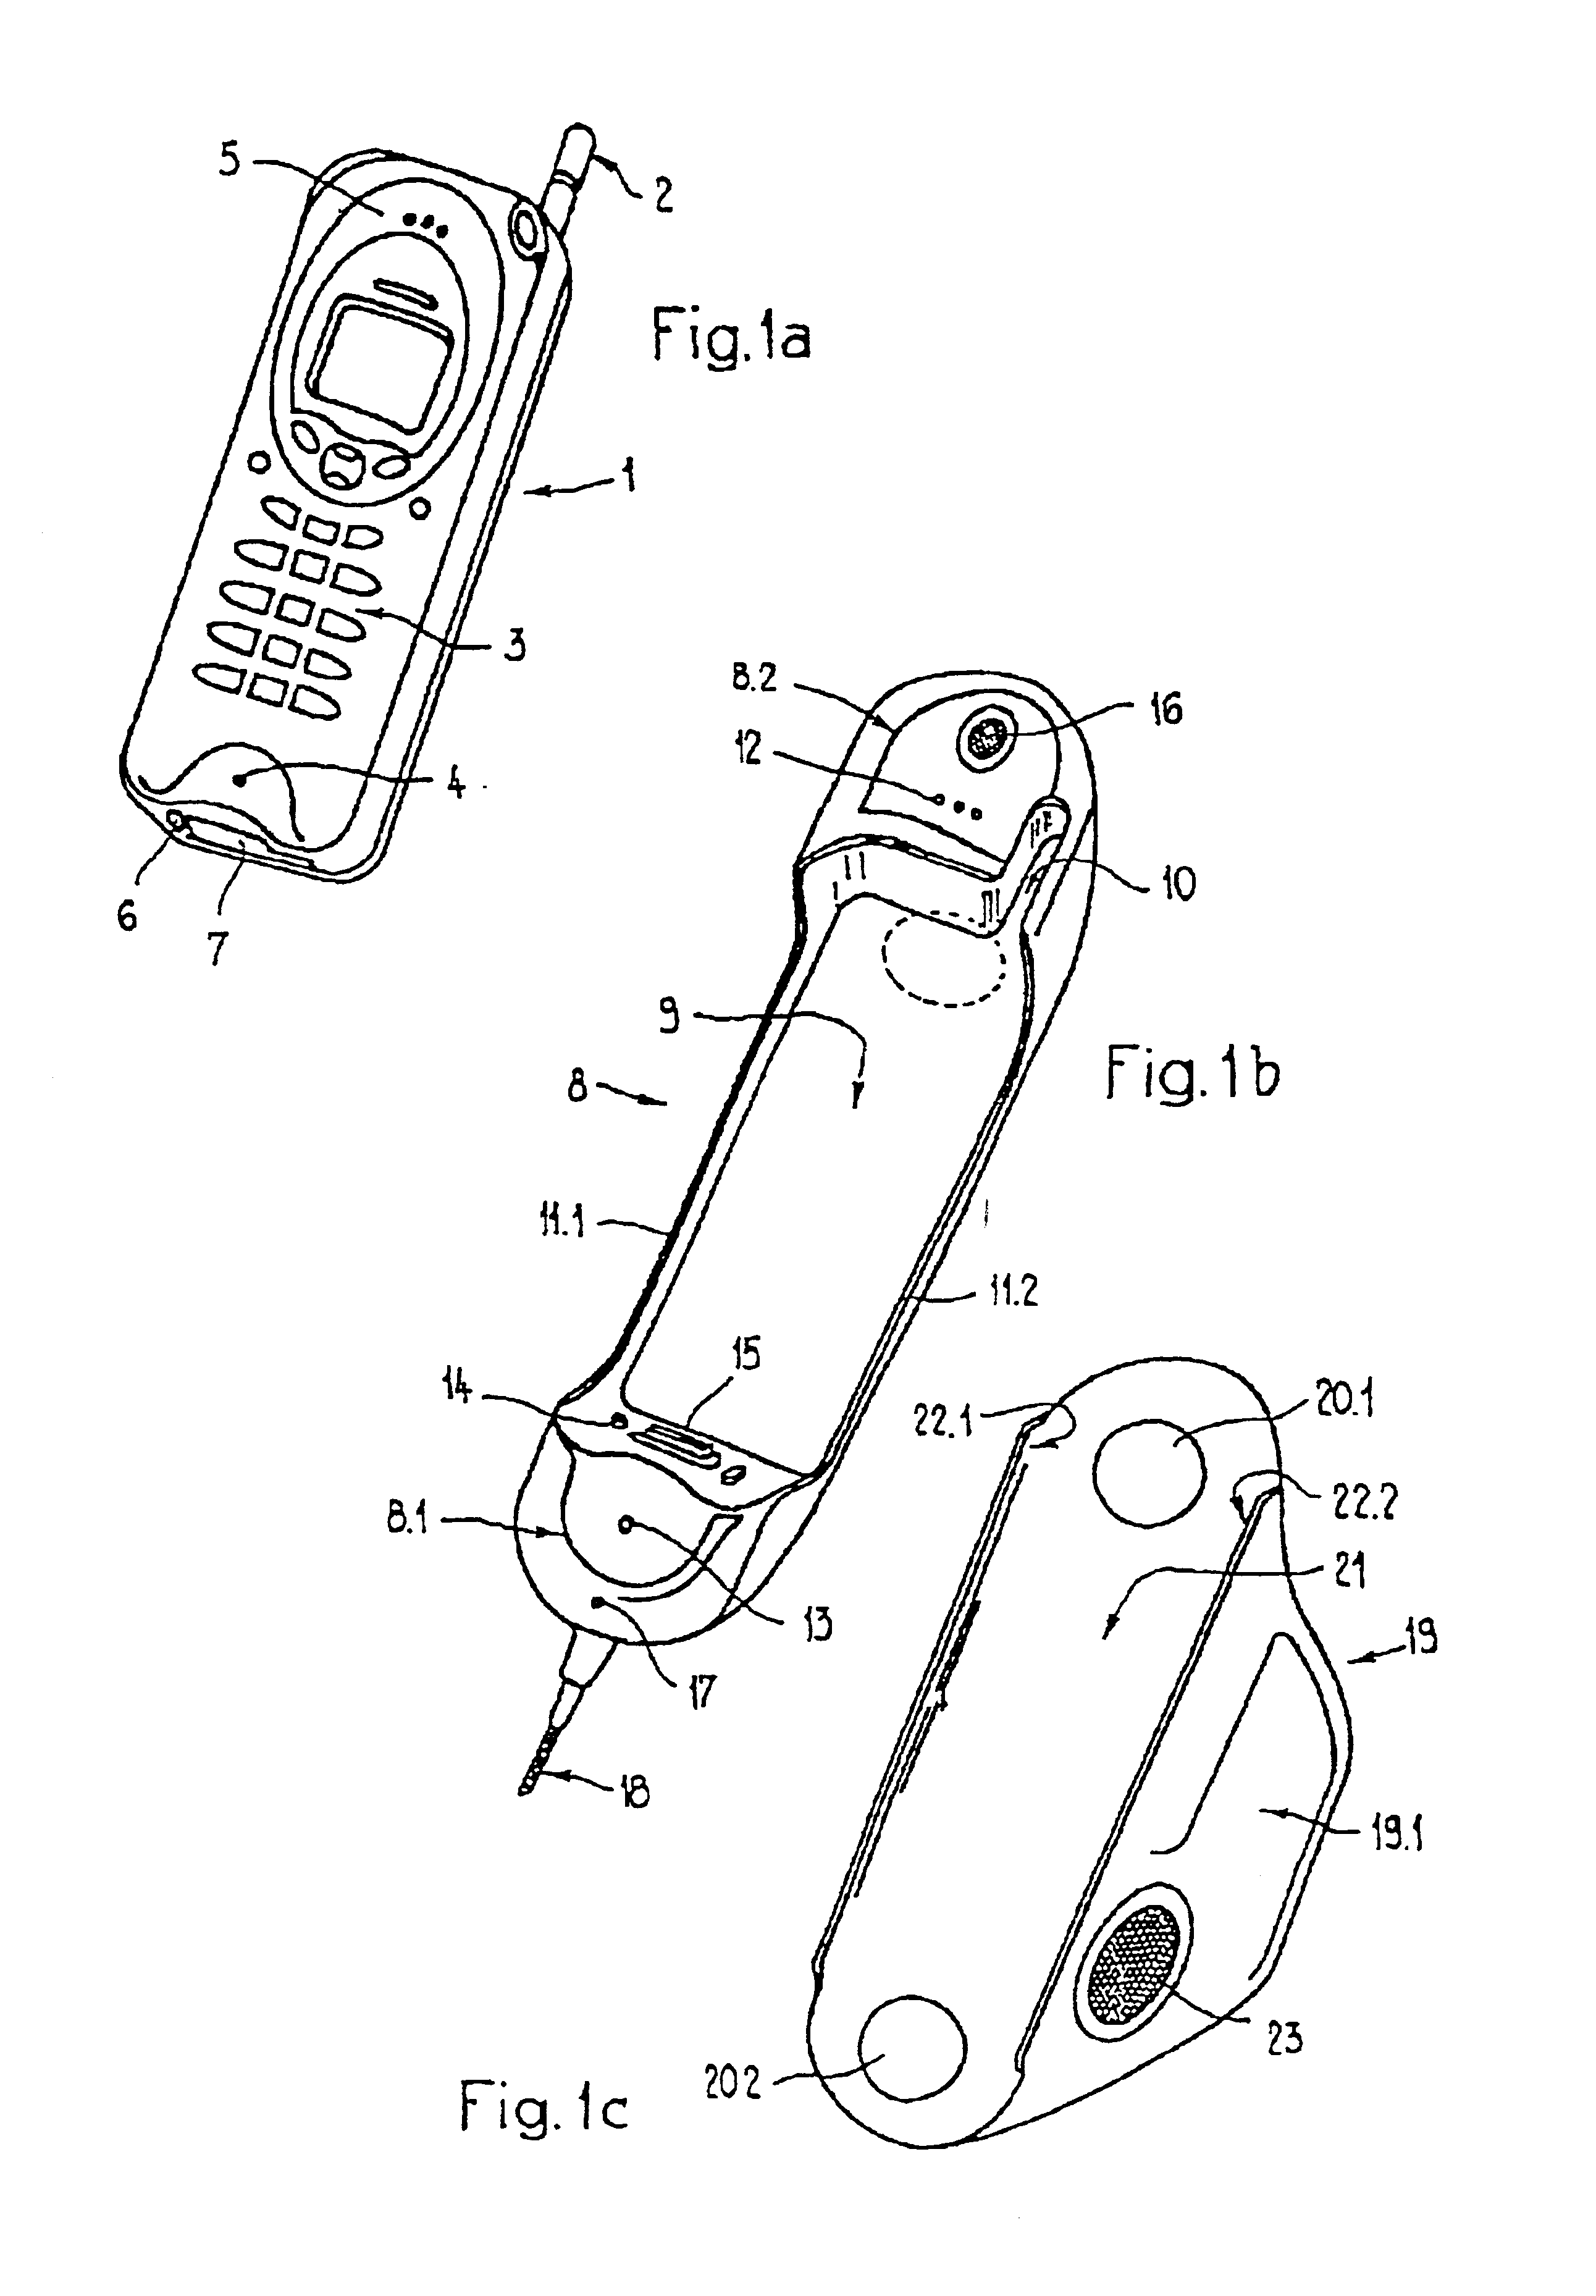 Telephone set with a handset having a mouthpiece and/or an earpiece